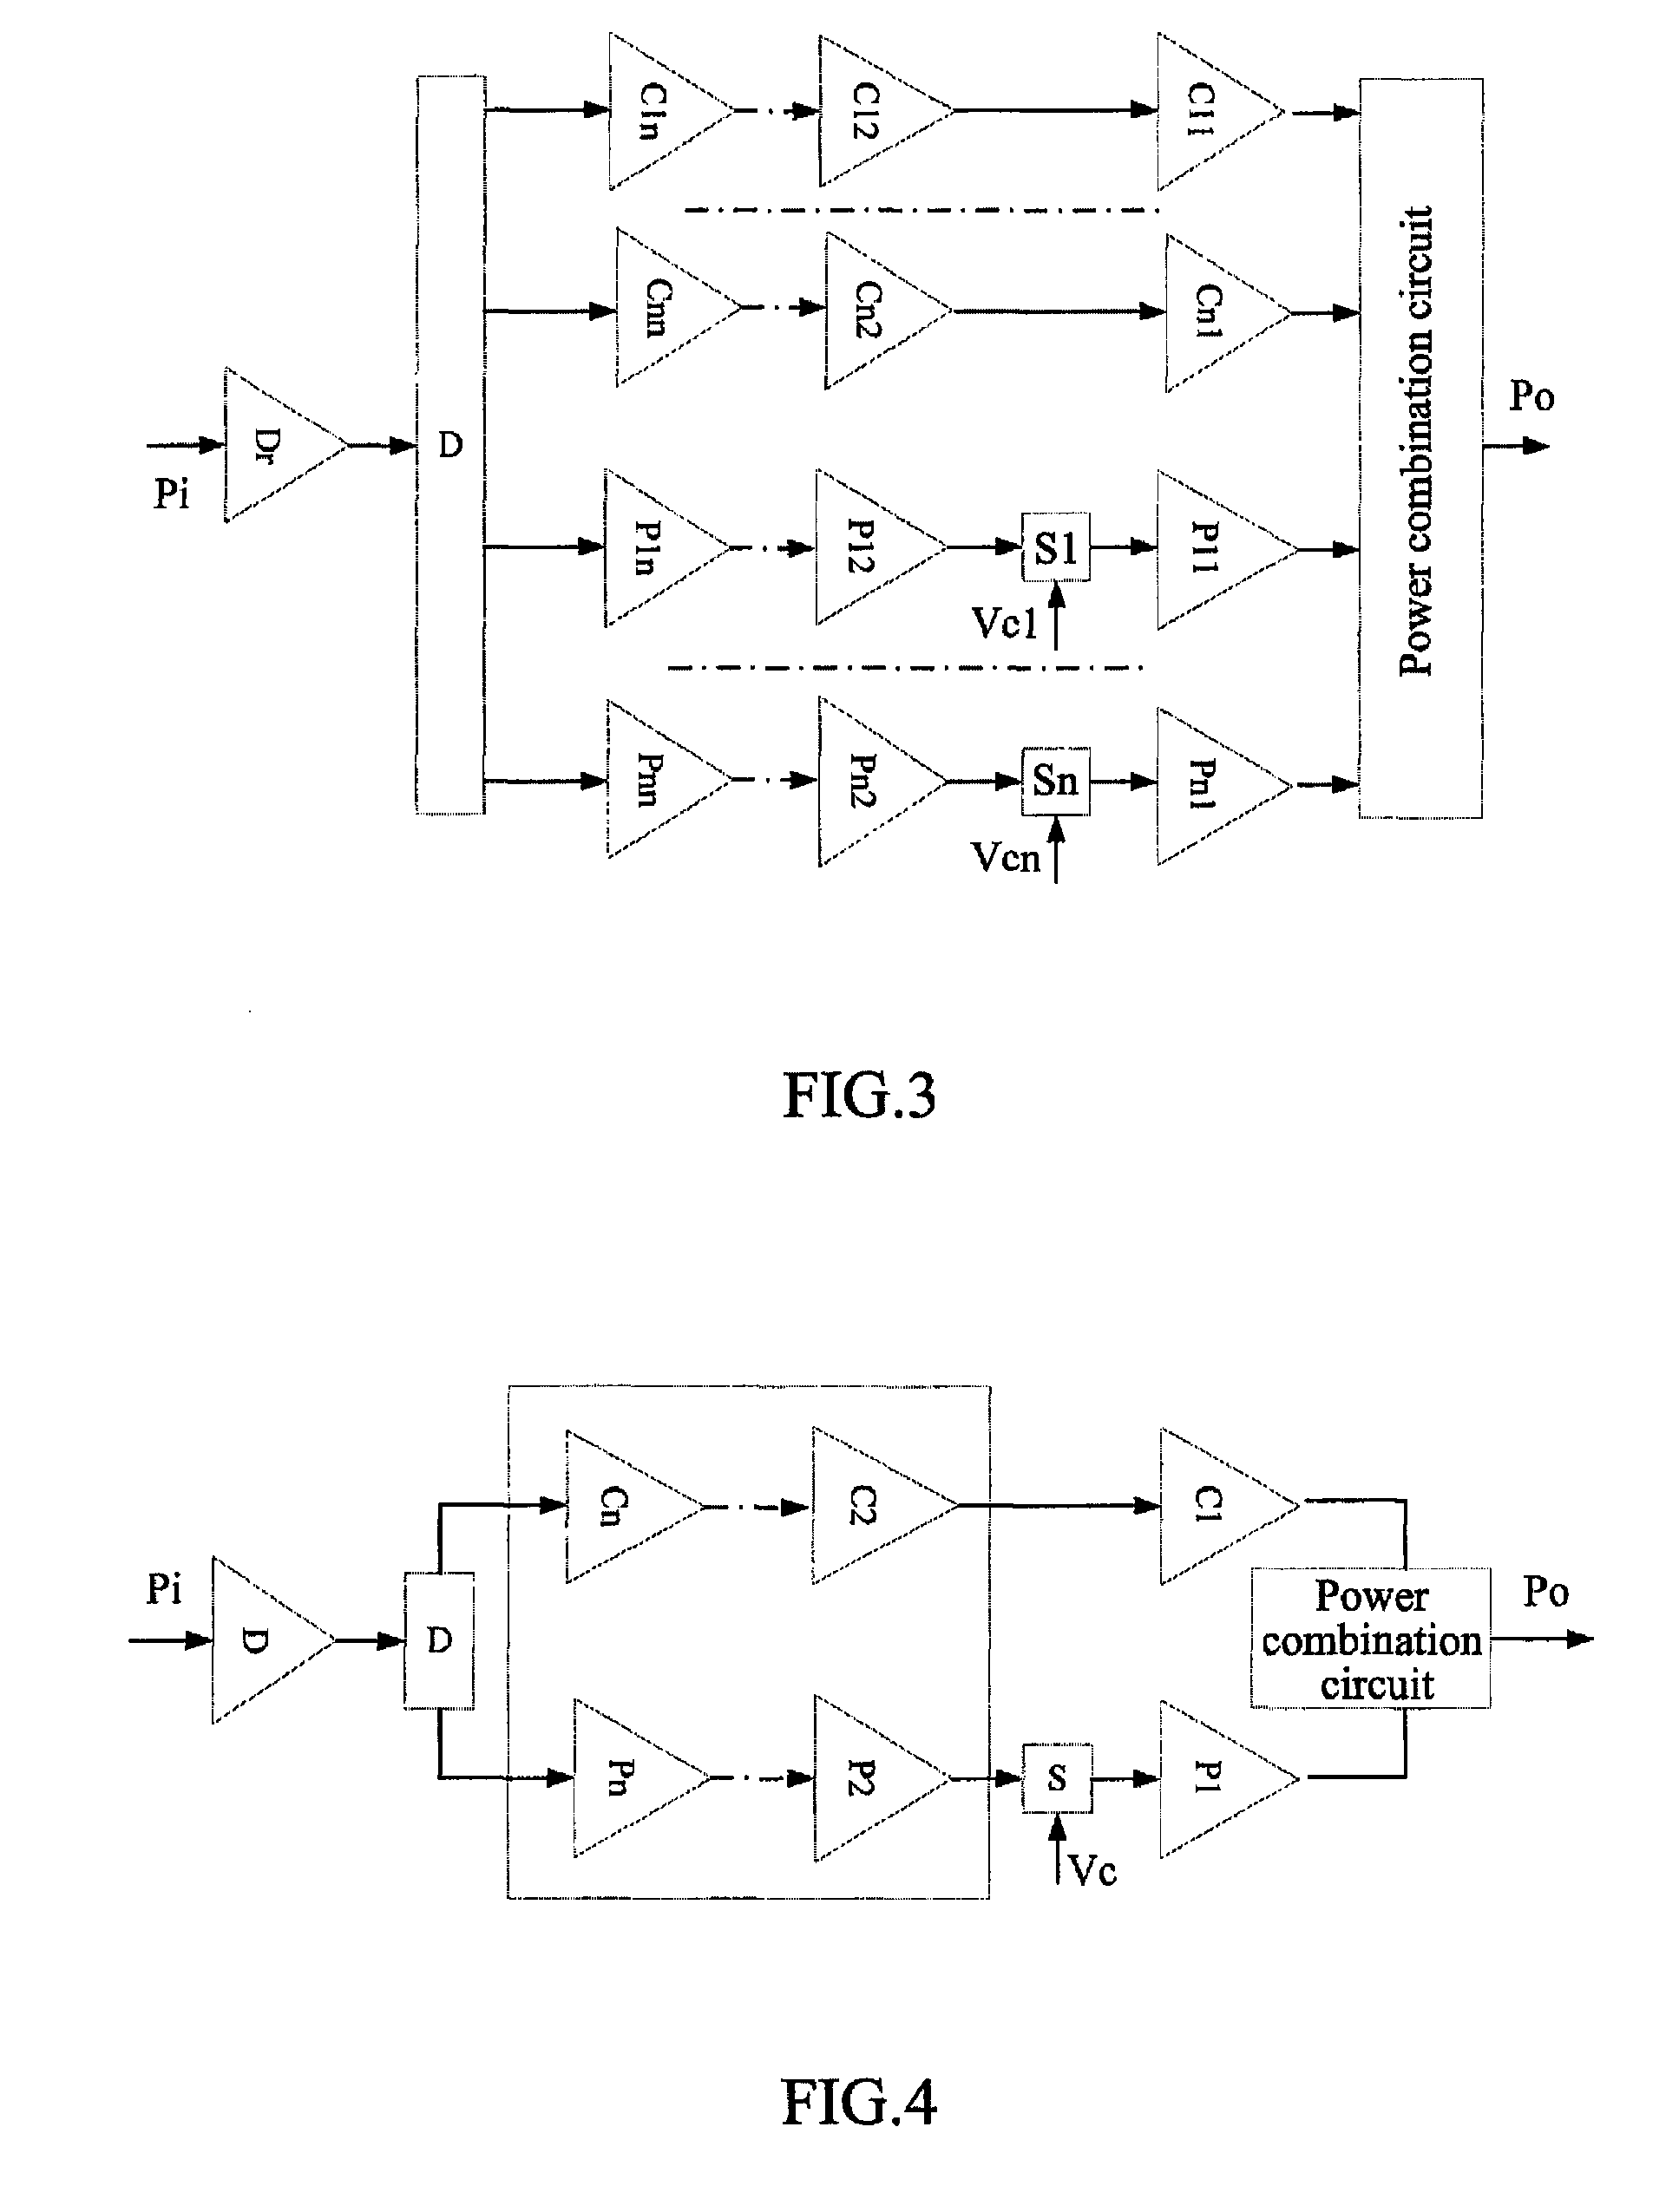 Method and apparatus for controlling peak amplifier and doherty power amplifier